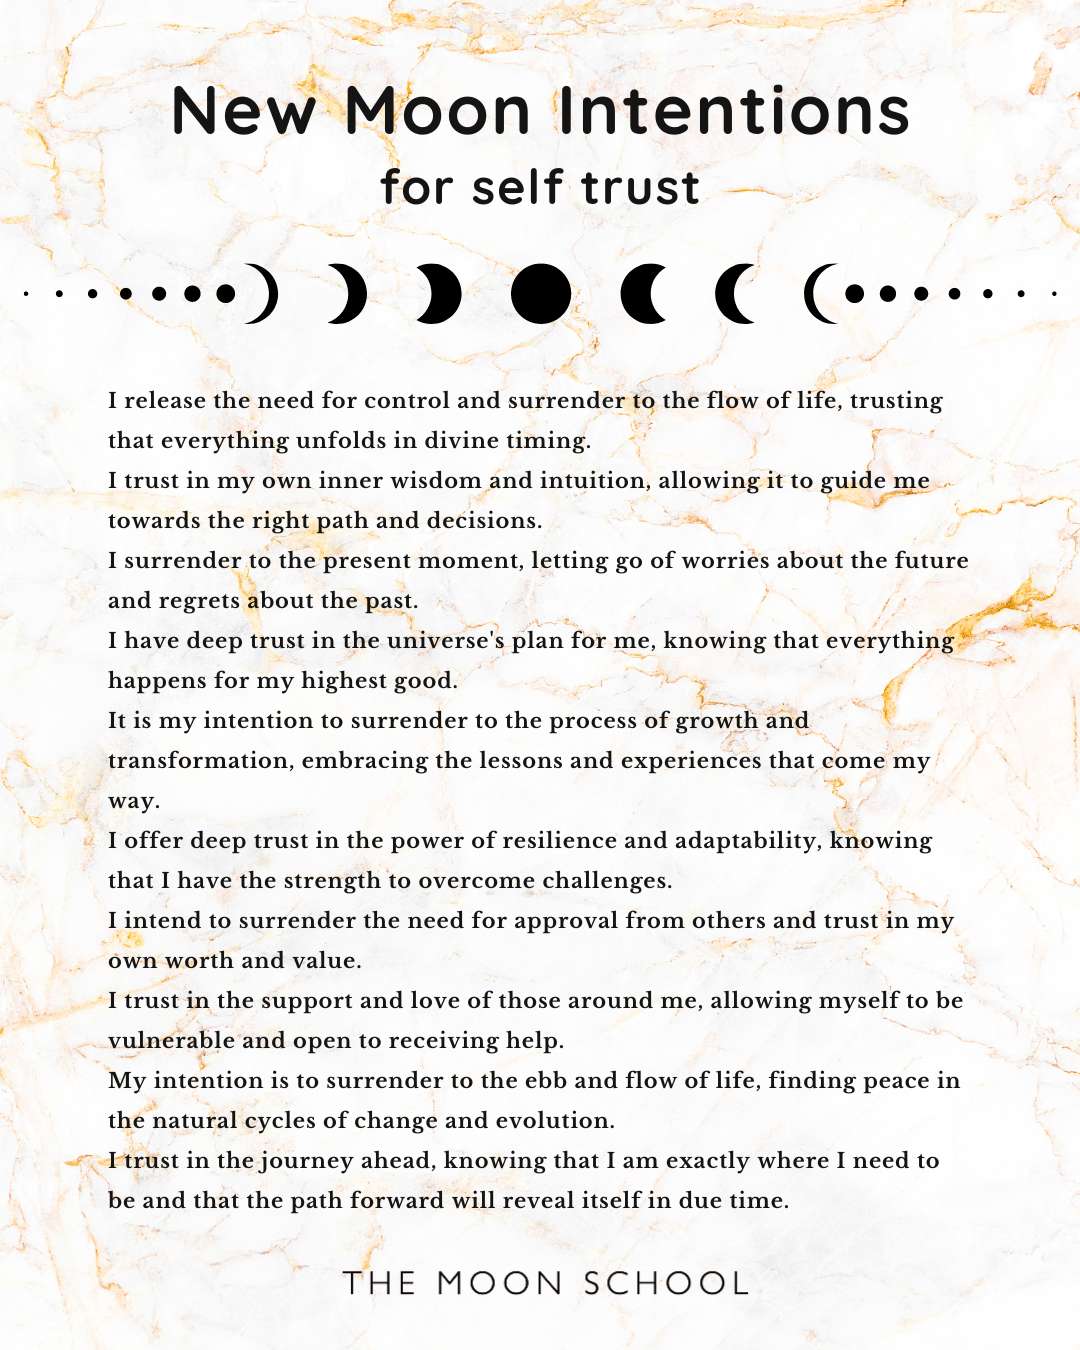 New Moon intentions for self trust